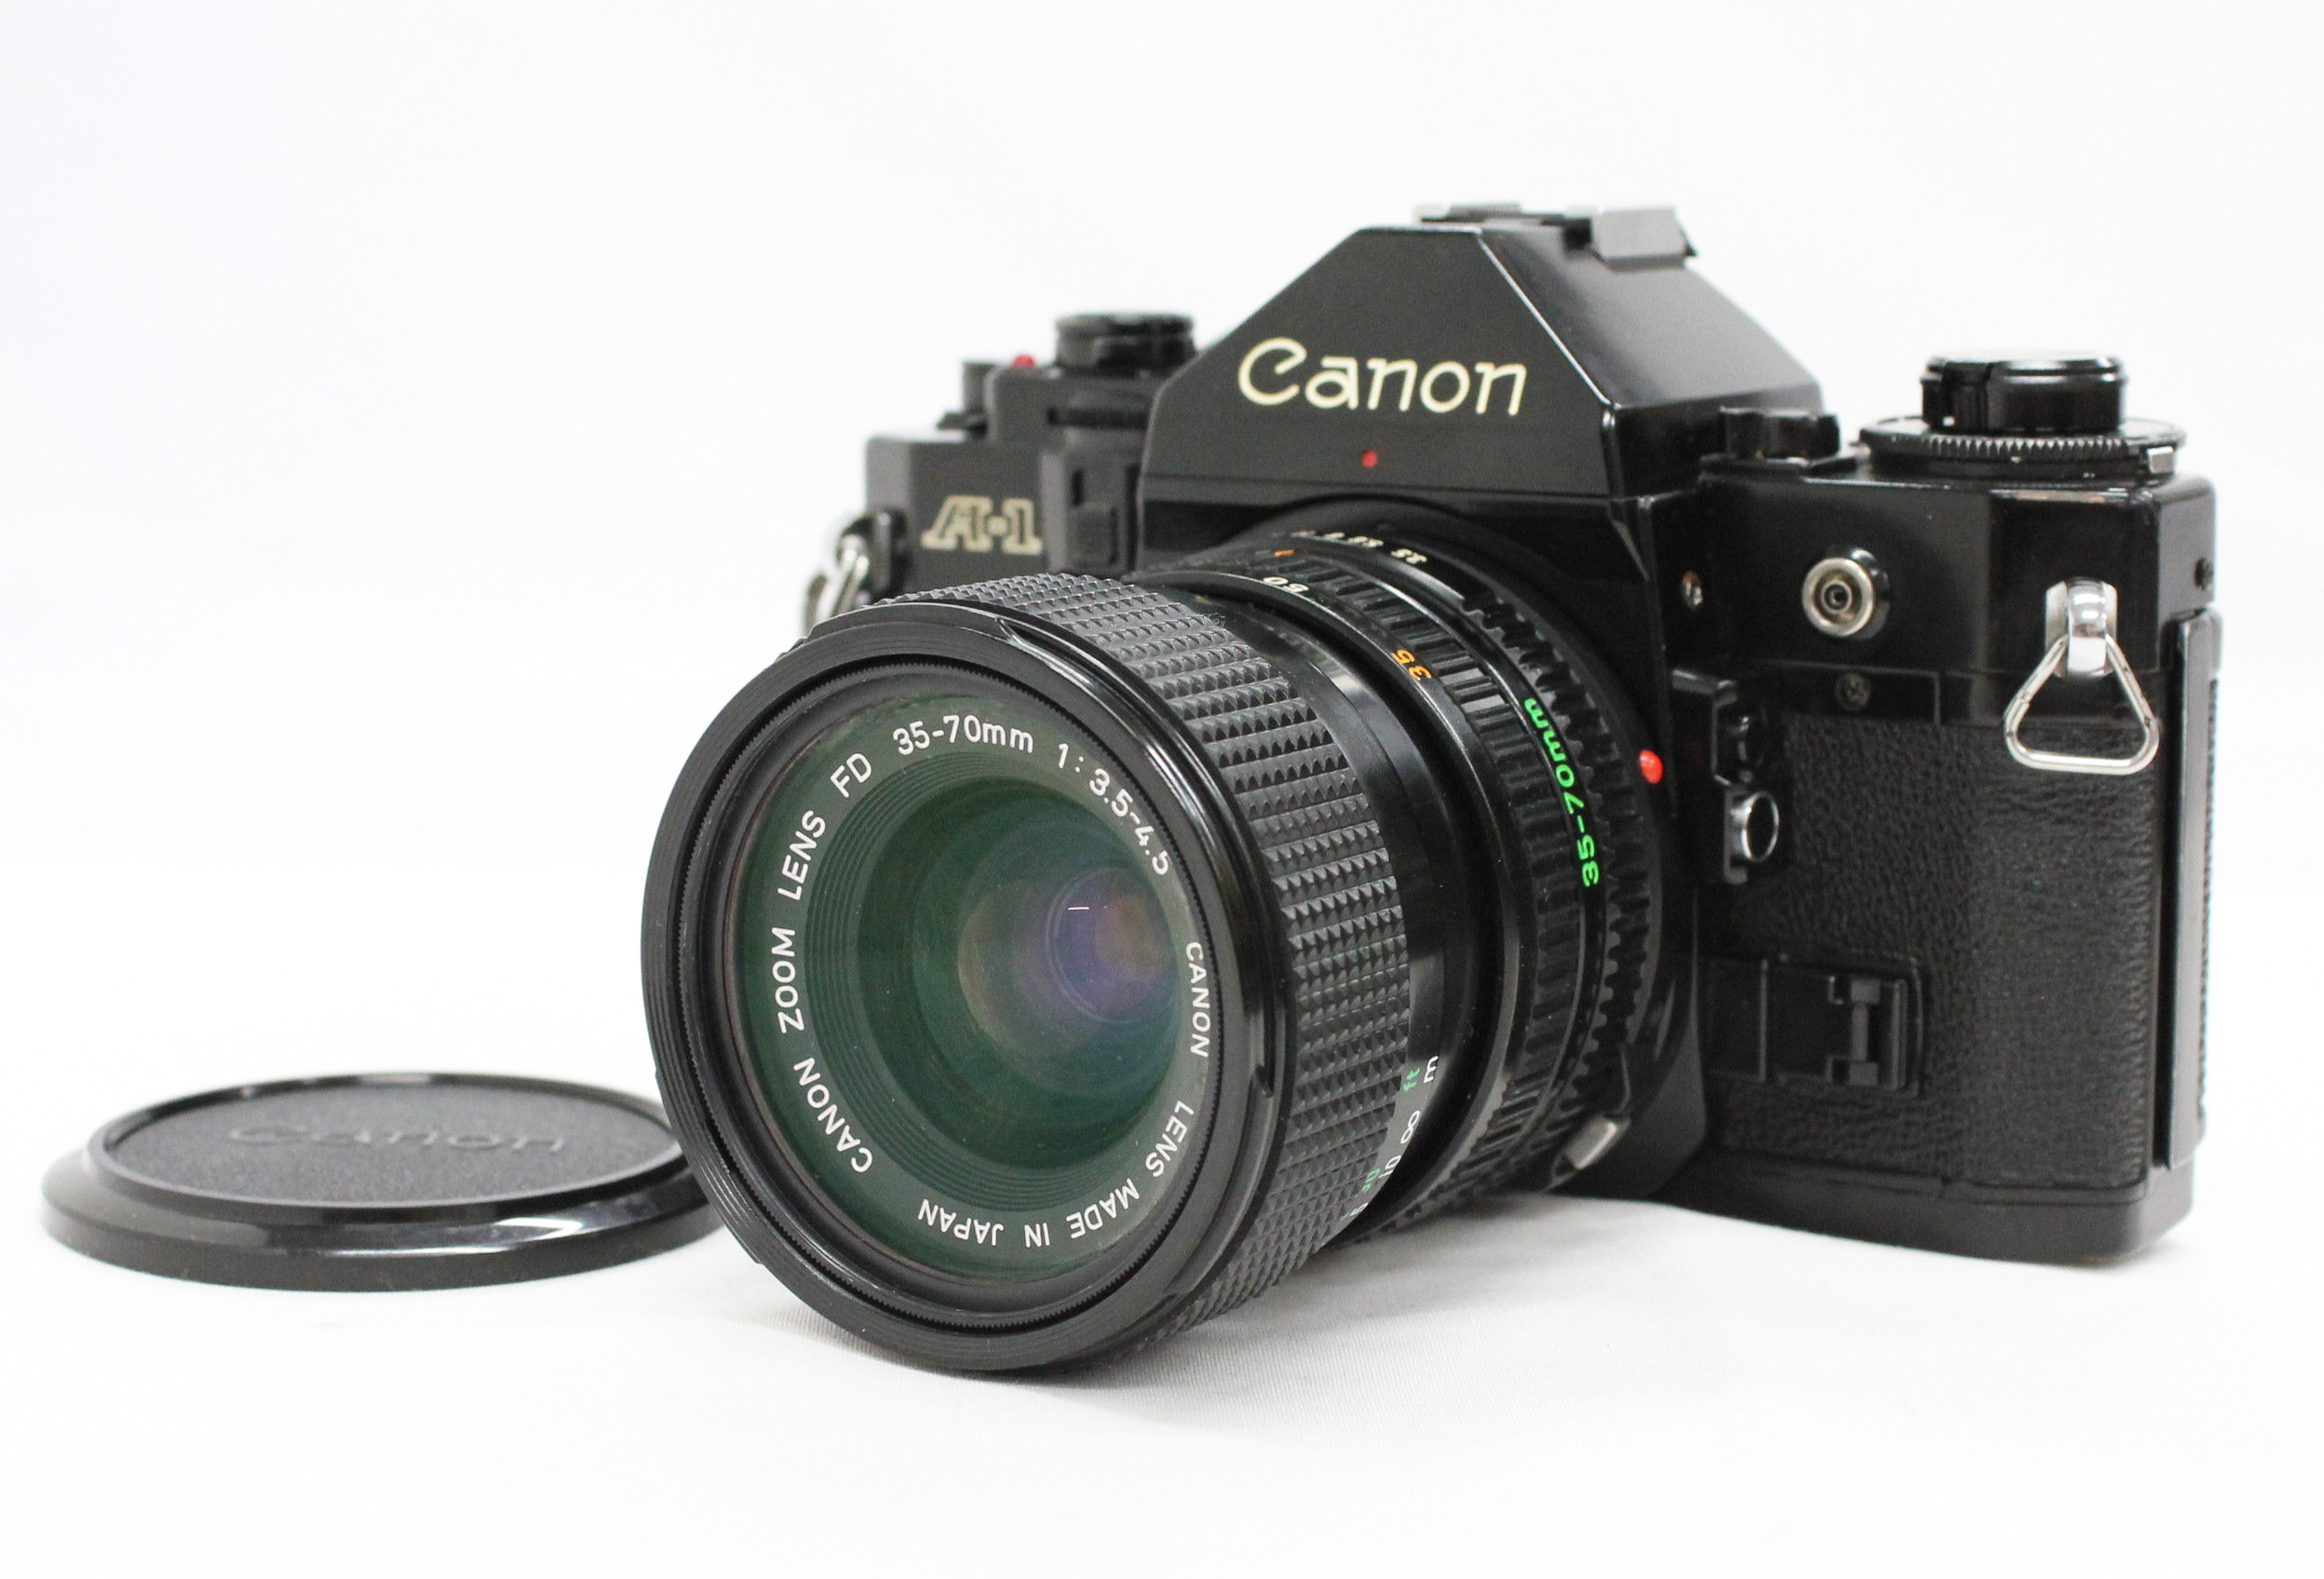 Japan Used Camera Shop | [Excellent+++] Canon A-1 Body Black with New FD NFD 35-70mm F/3.5-4.5 Lens from Japan